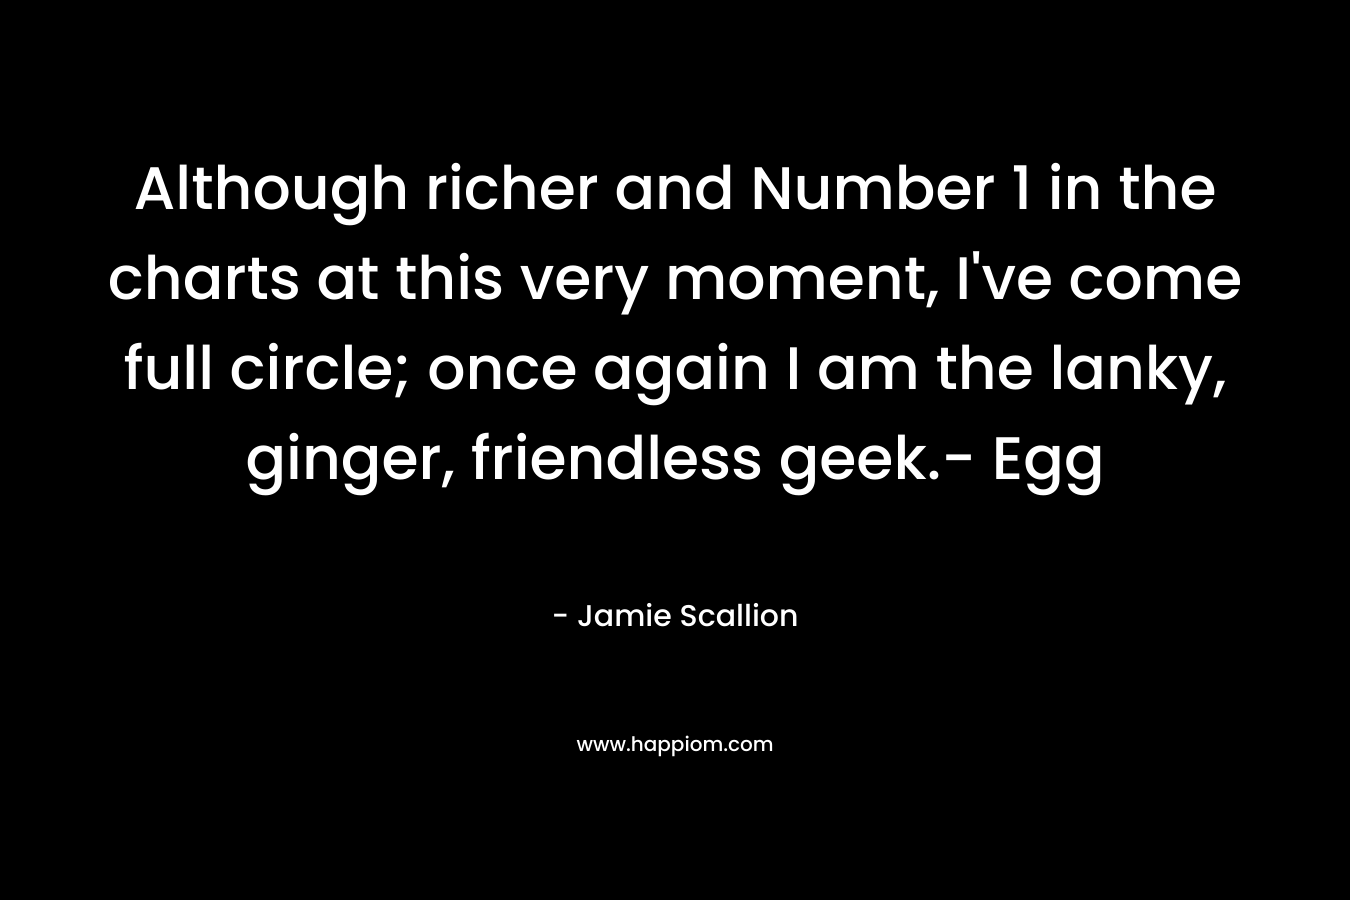 Although richer and Number 1 in the charts at this very moment, I’ve come full circle; once again I am the lanky, ginger, friendless geek.- Egg – Jamie Scallion